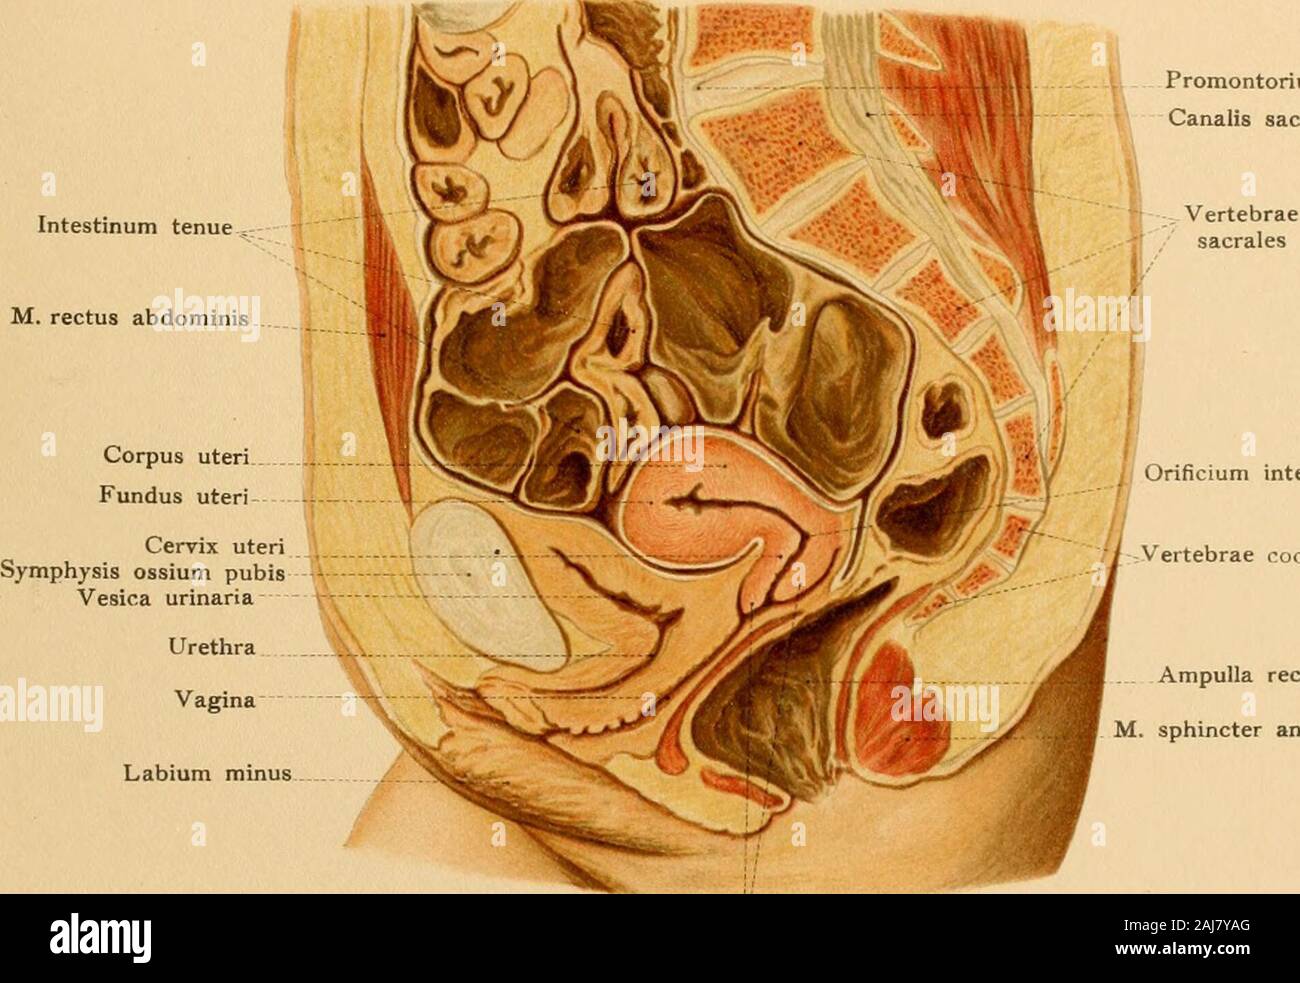 Atlas and text-book of topographic and applied anatomy . External os uteri and an g %1d:1 l,:rM,a Iwhch - z fcsuei ^— I i ^?^n tn,c / nav ii.»a/ &gt;ii*&gt;^&gt;- —— ... ? i .   I THE PELVIC CAVITY IN THE FEMALE. Tab. 1romontoriumCanalis sacralis. lhcium internun Vertebrae i-orcvgeae Ampulla rectisphincter ani externus Portio vaginalis (cervicis) Fig. ?2. Fallopian tube Ovarian vessels Suspensory ligament of ovan Round ligamentInternal iliac artery Stock Photo